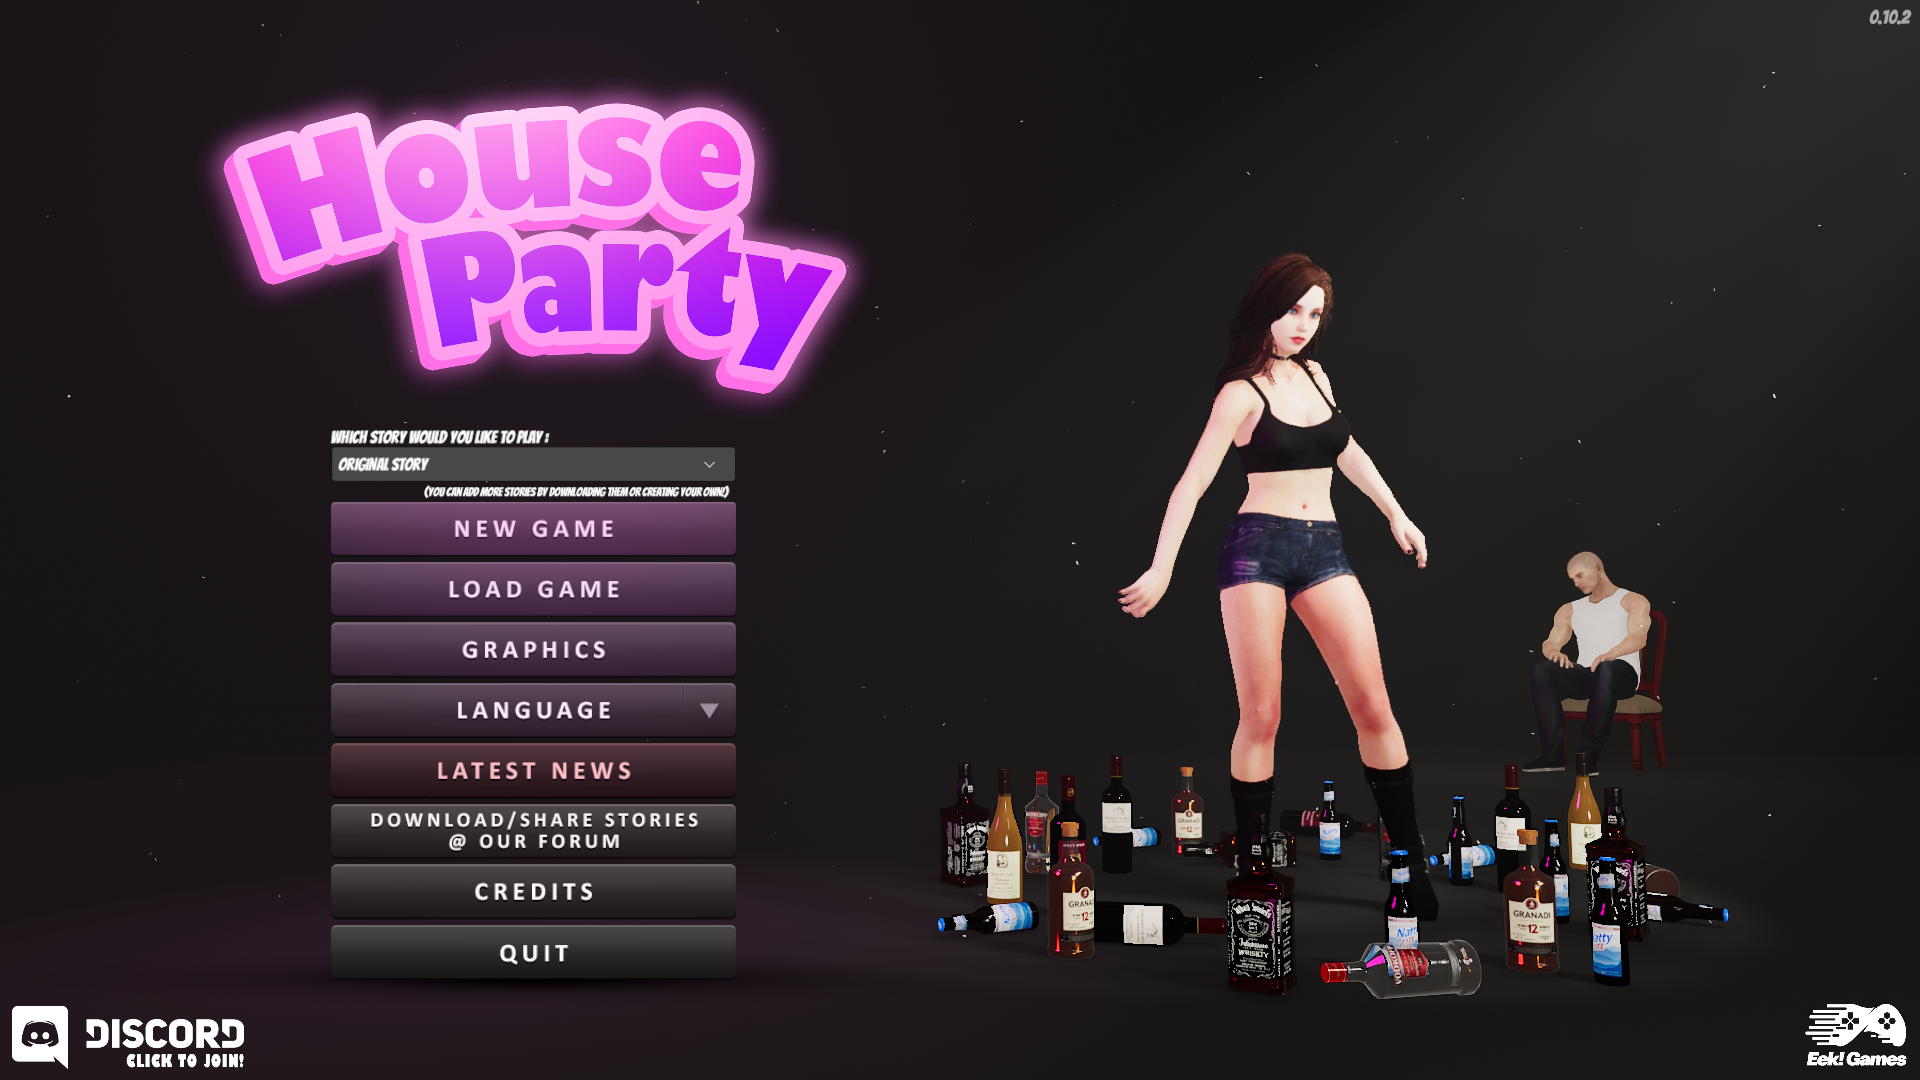 Sex Games Party - Adult Games World Â» House Party â€“ New Final Version 1.1.6.1 (Full Game)  [Eek! Games]